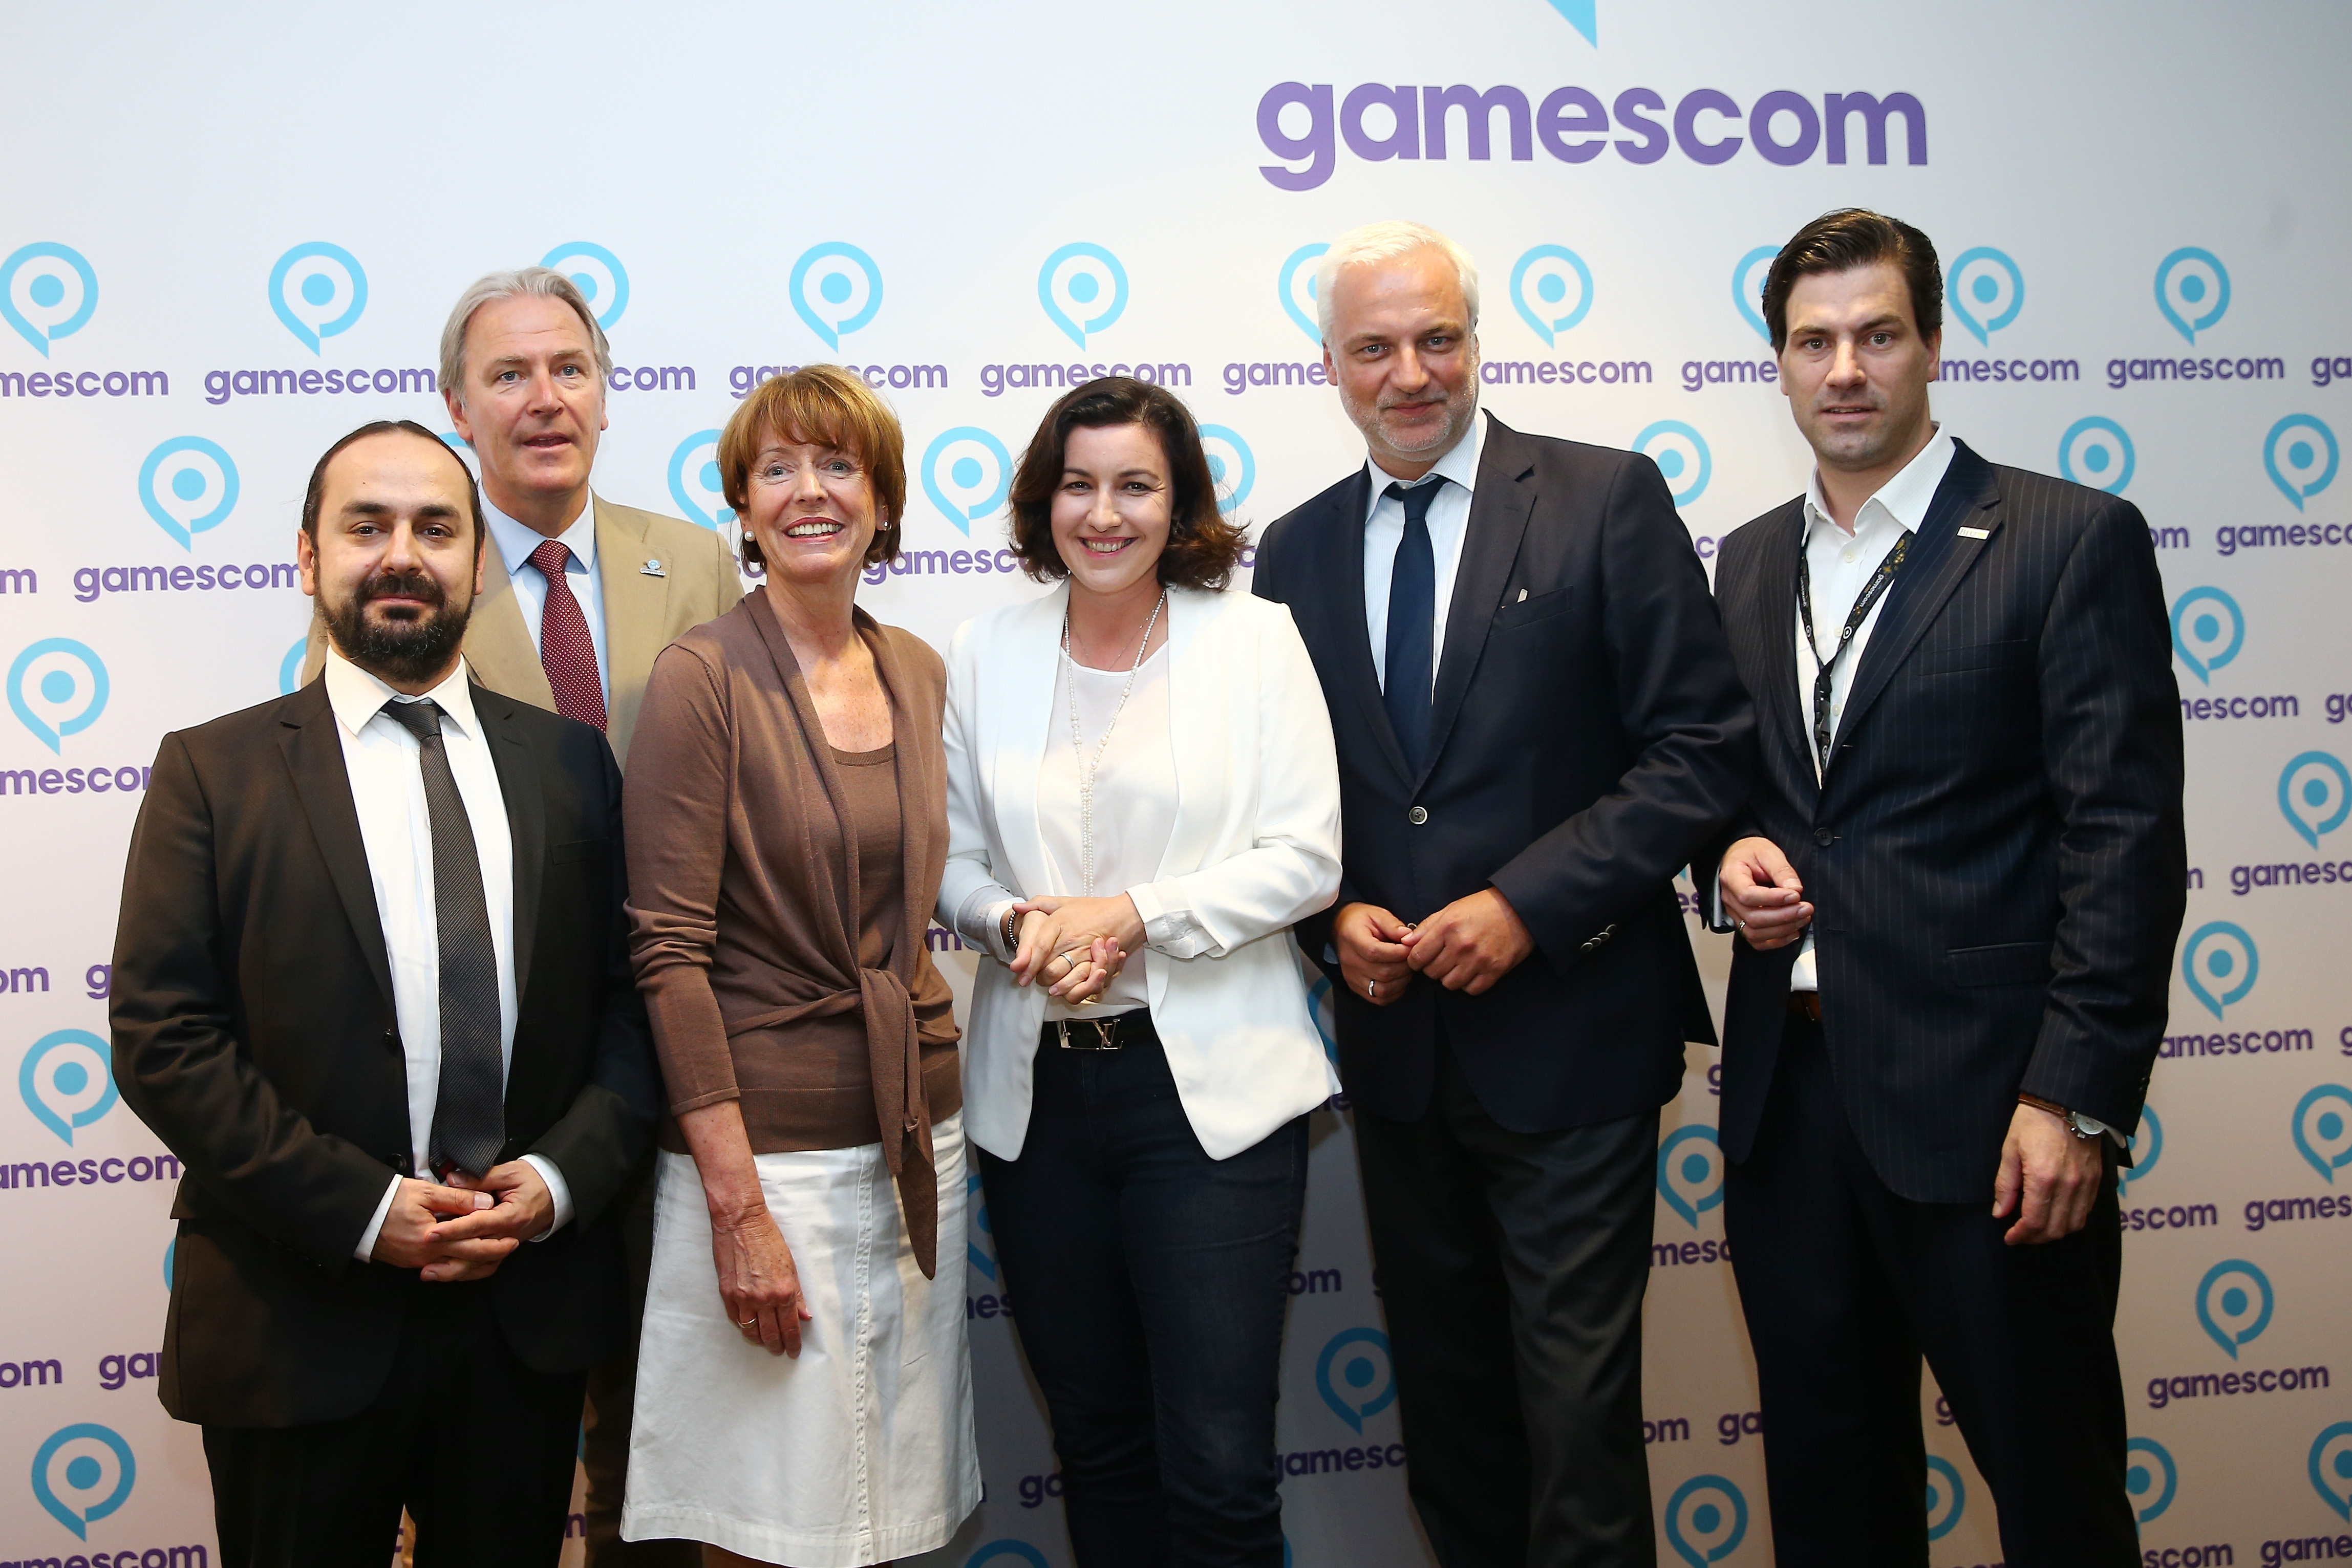 Kick-off for gamescom 2016: visiting politicians check out the latest trends